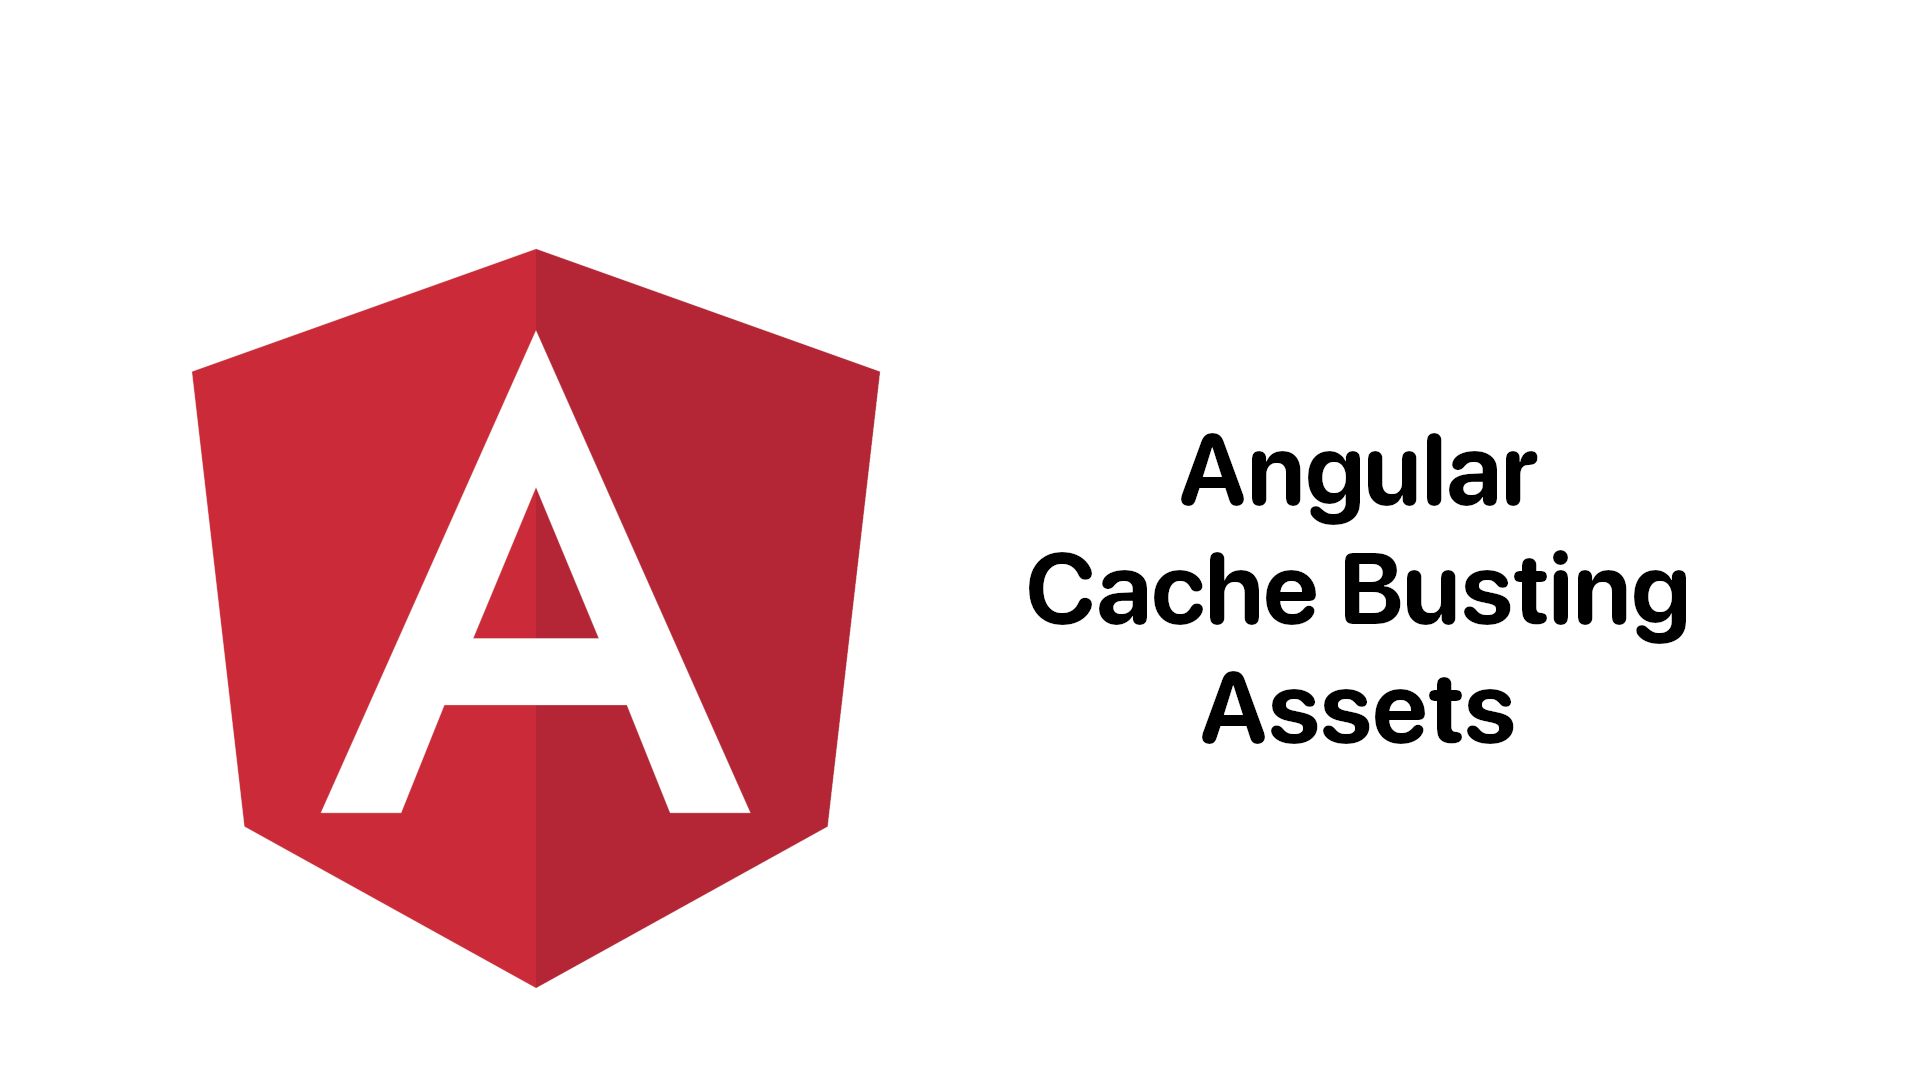 Angular logo and text "cache busting assets" next to it